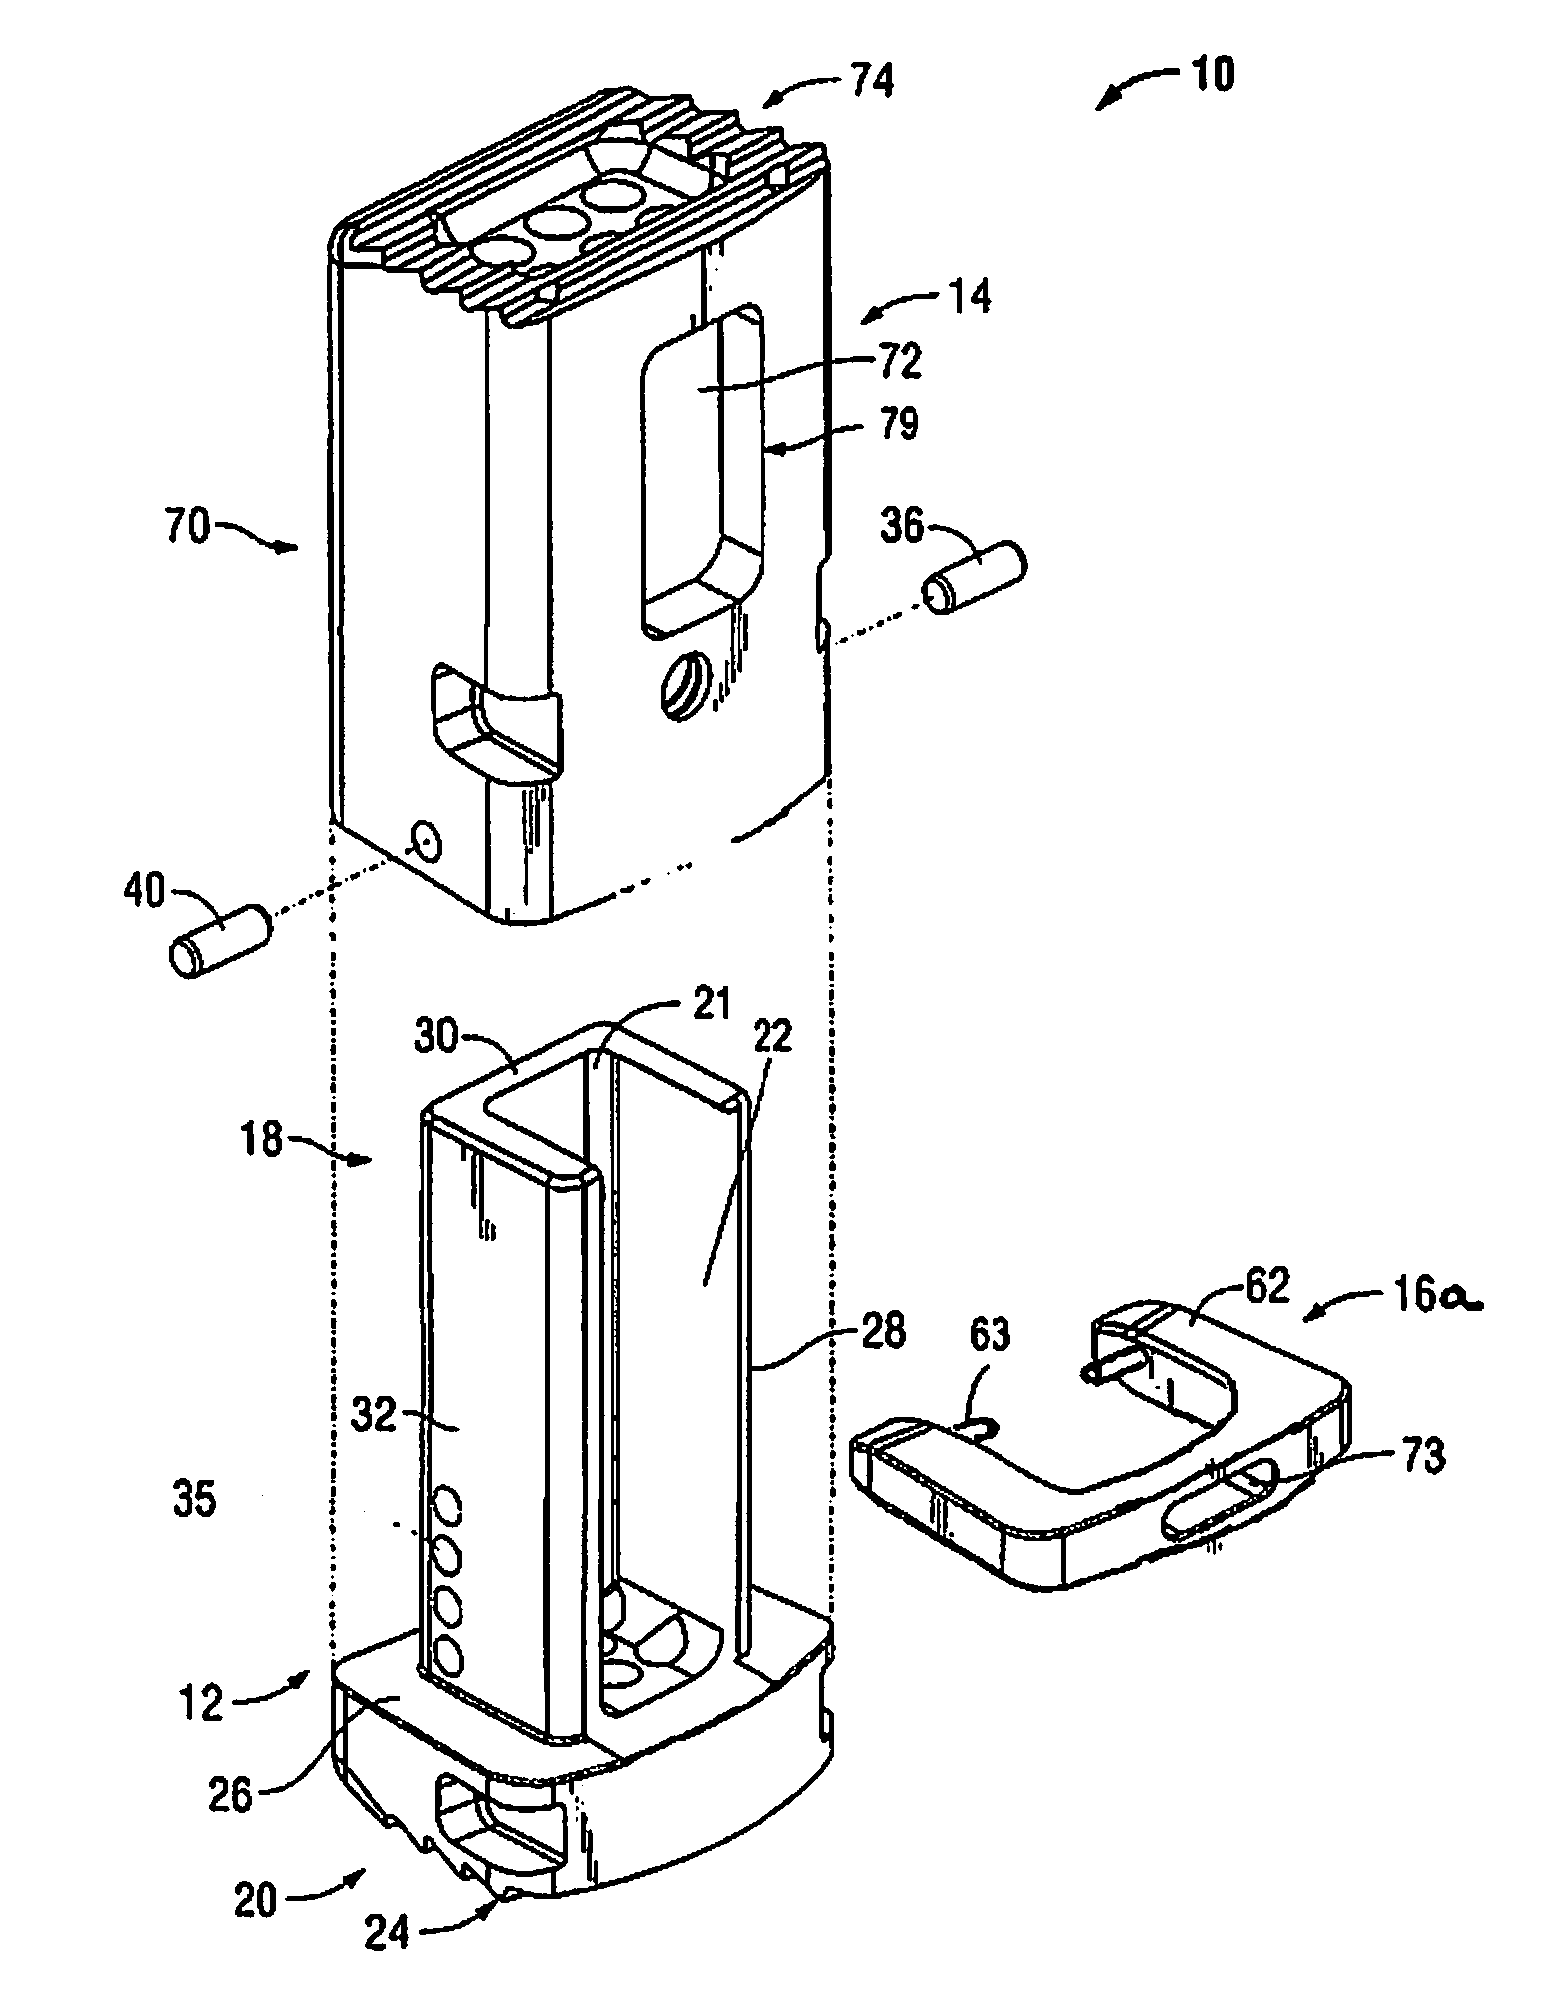 Expandable cage with locking device